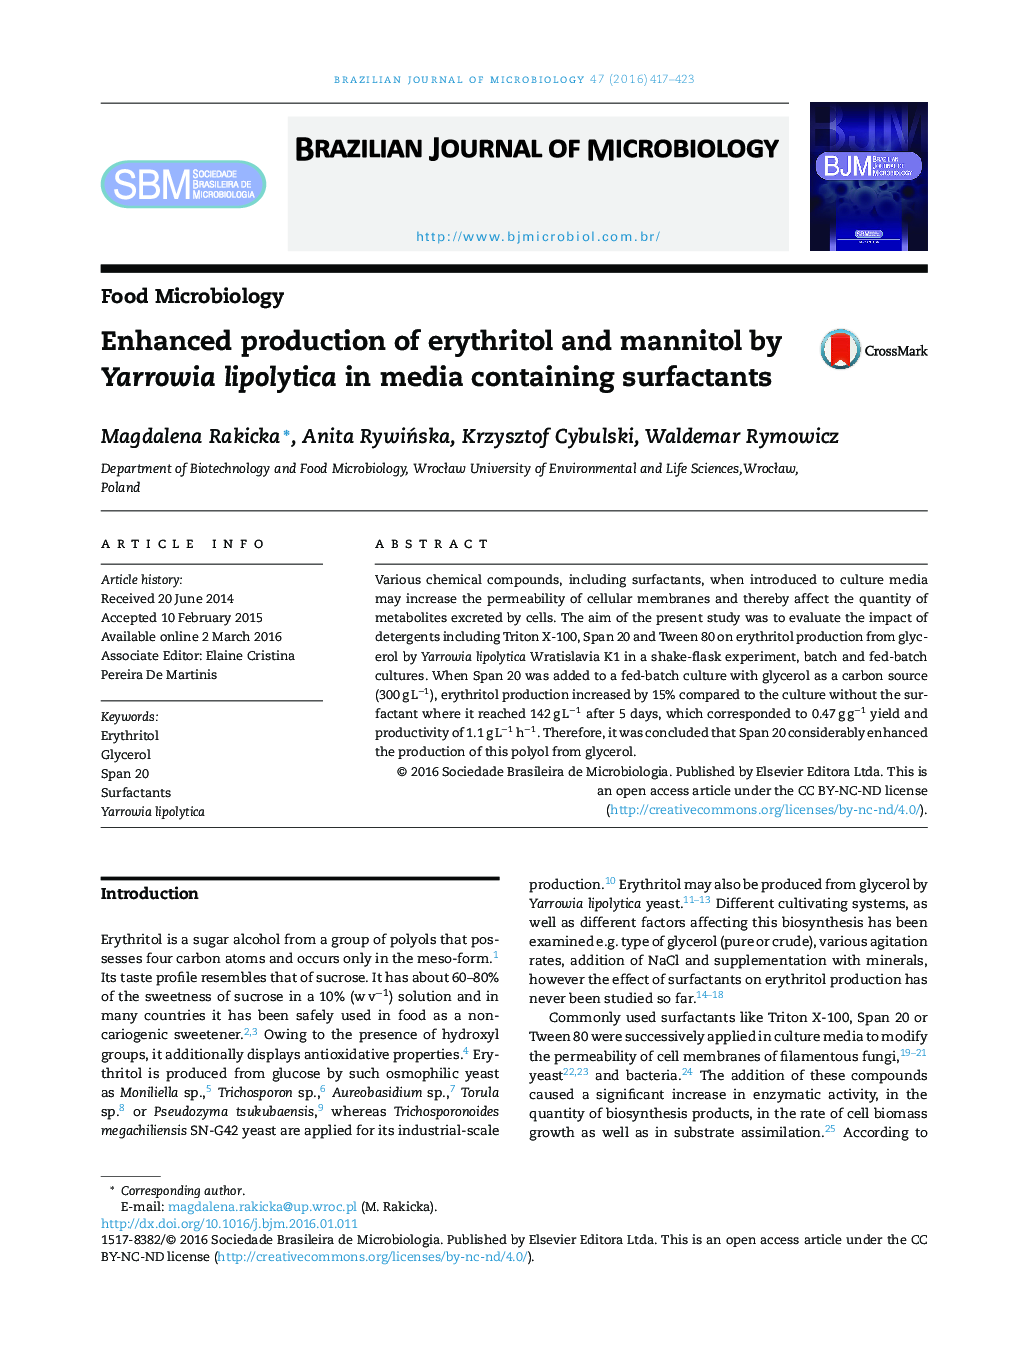 Enhanced production of erythritol and mannitol by Yarrowia lipolytica in media containing surfactants